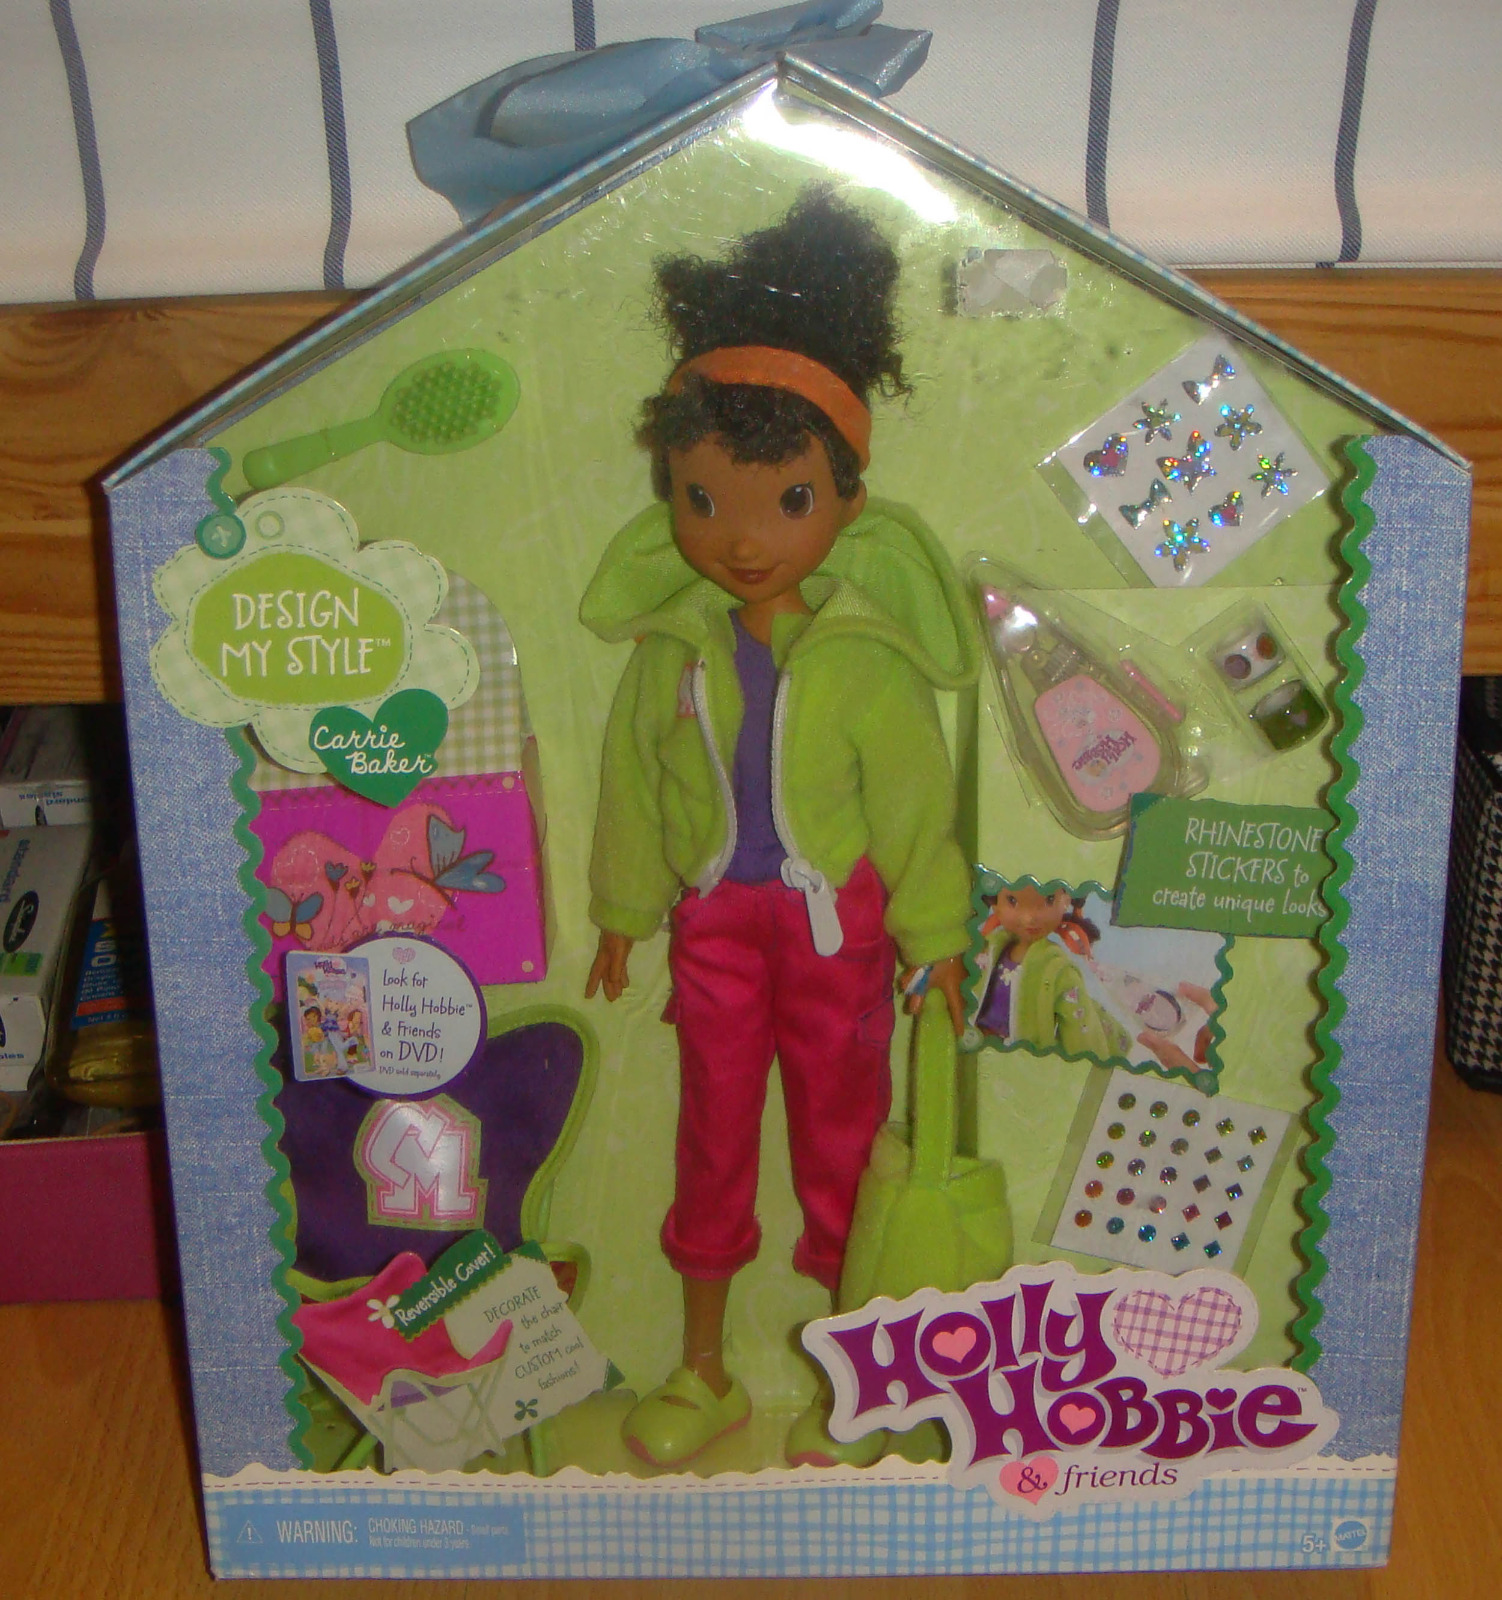 Holly Hobbie Design My Style Doll Carrie Baker 10" Aa Nrfb (b)